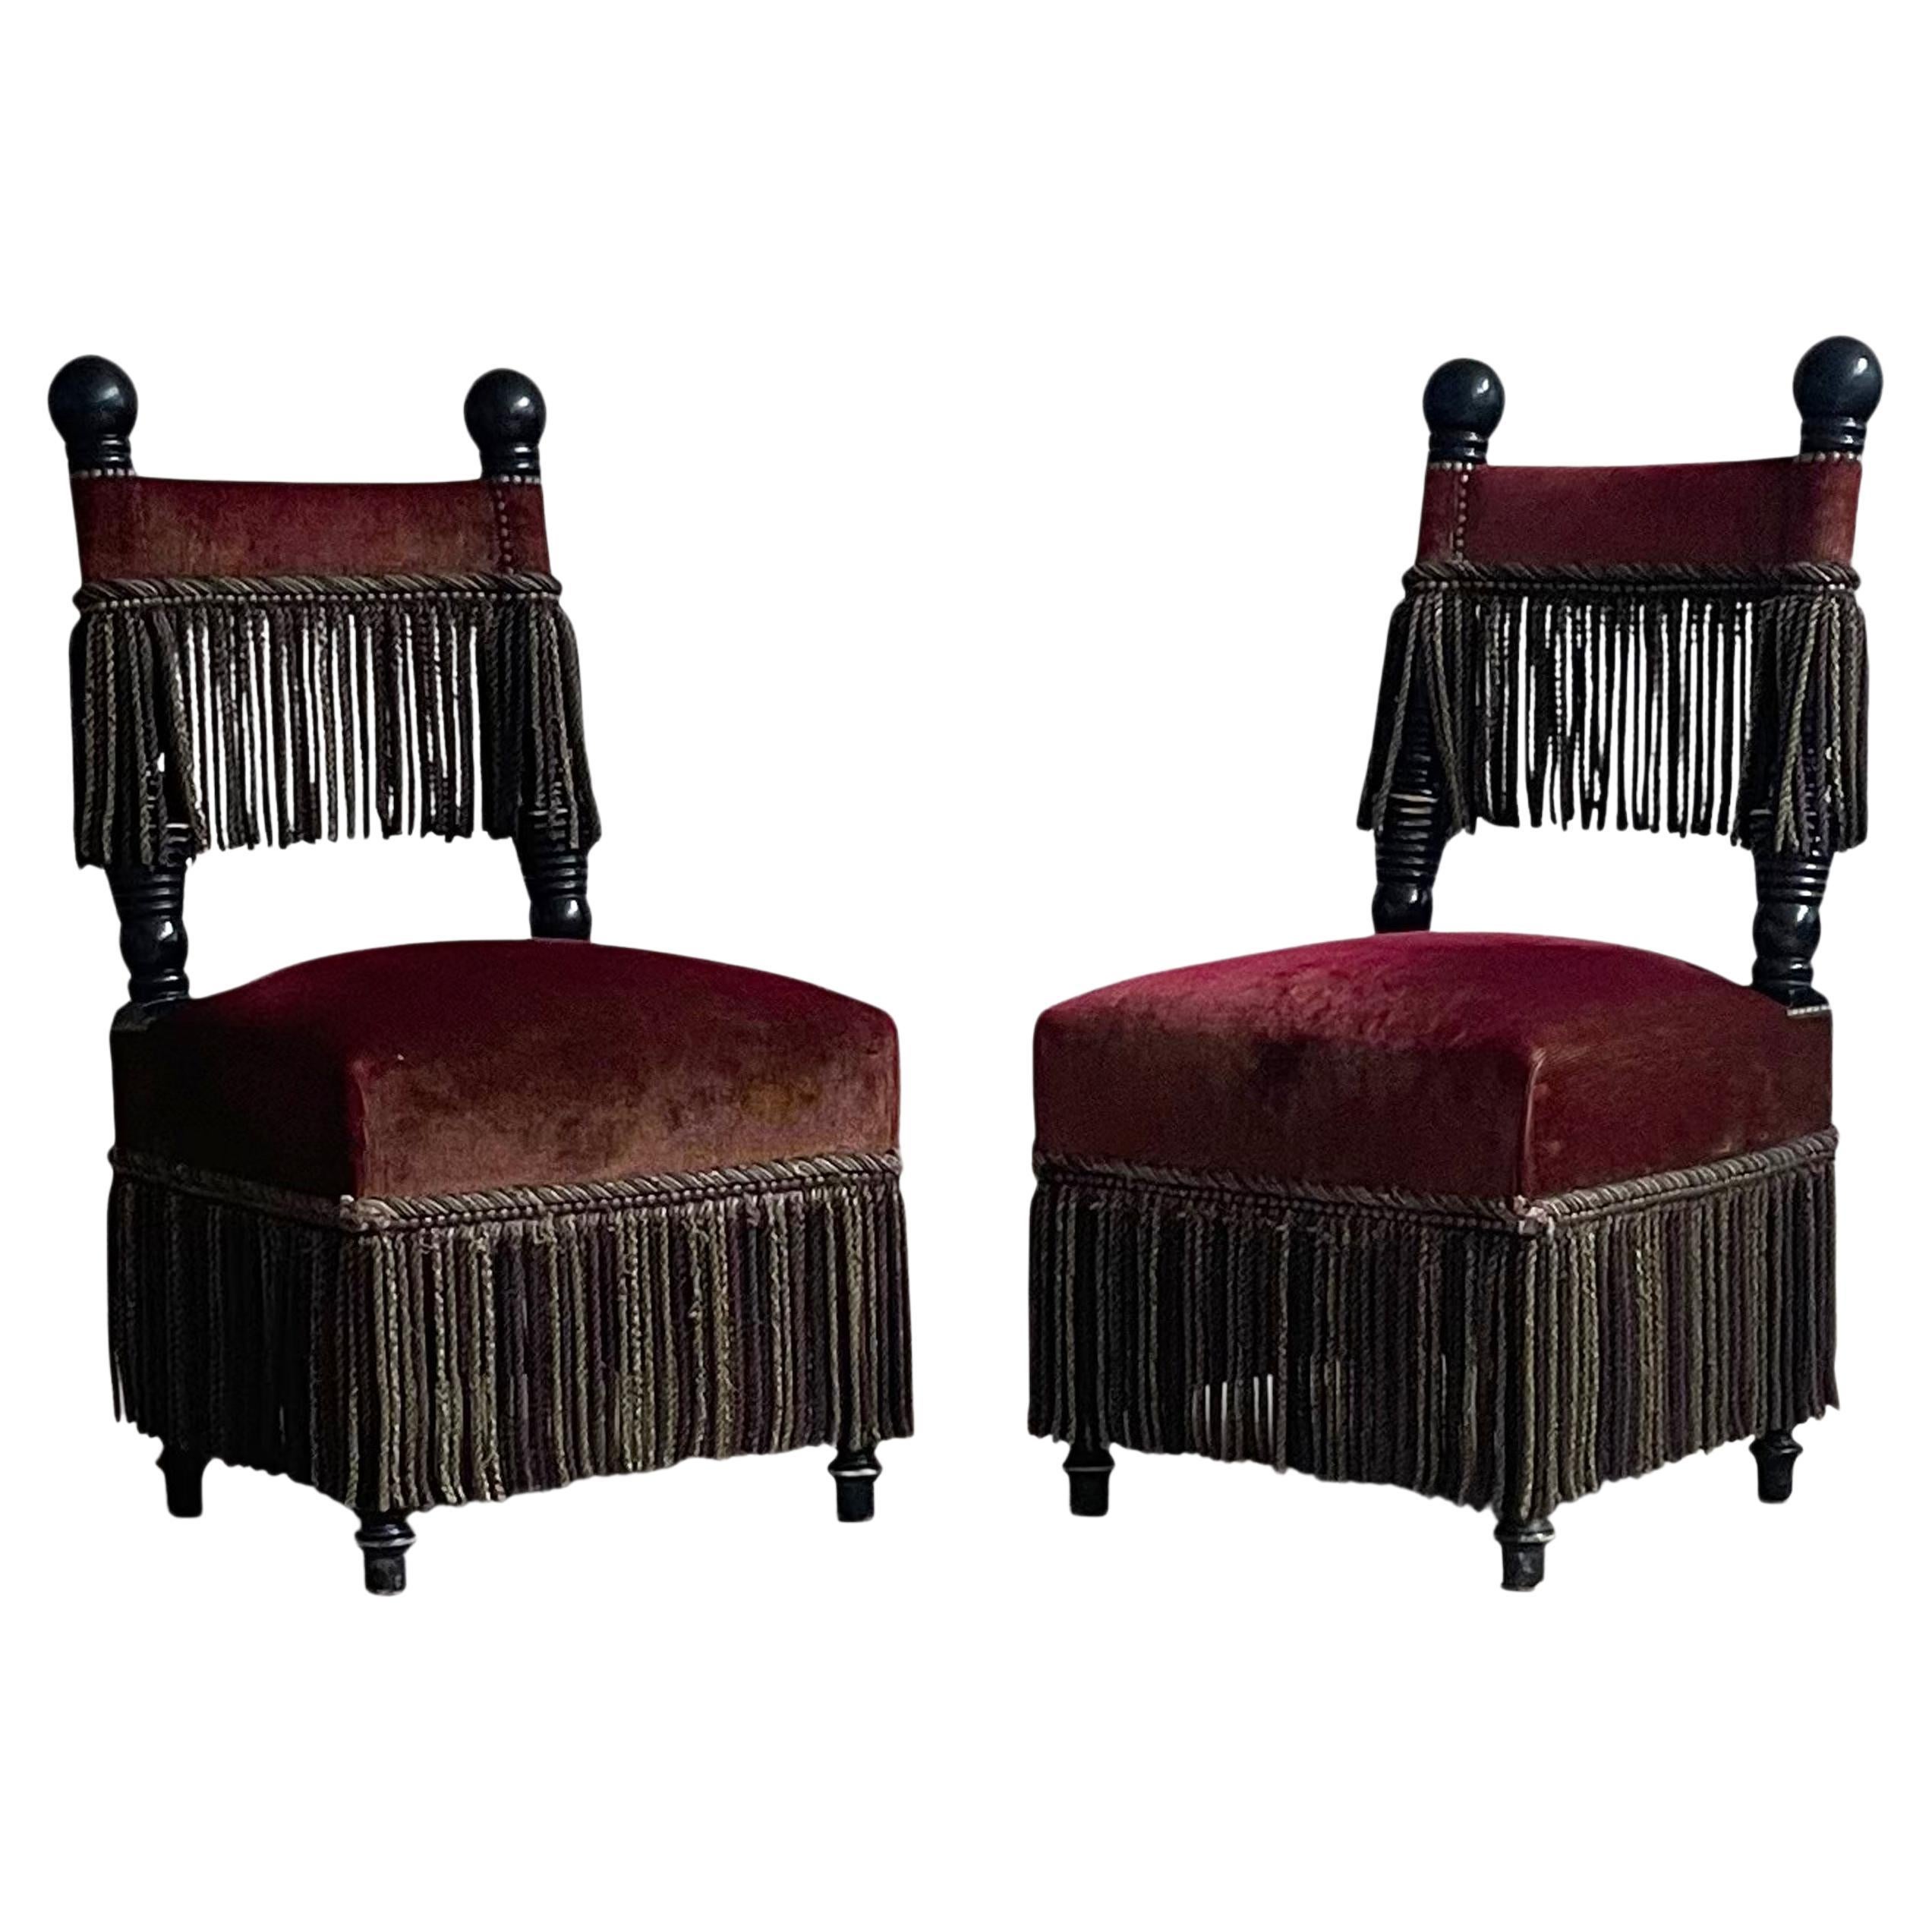 Fringed Chairs From Ladurée Patisserie